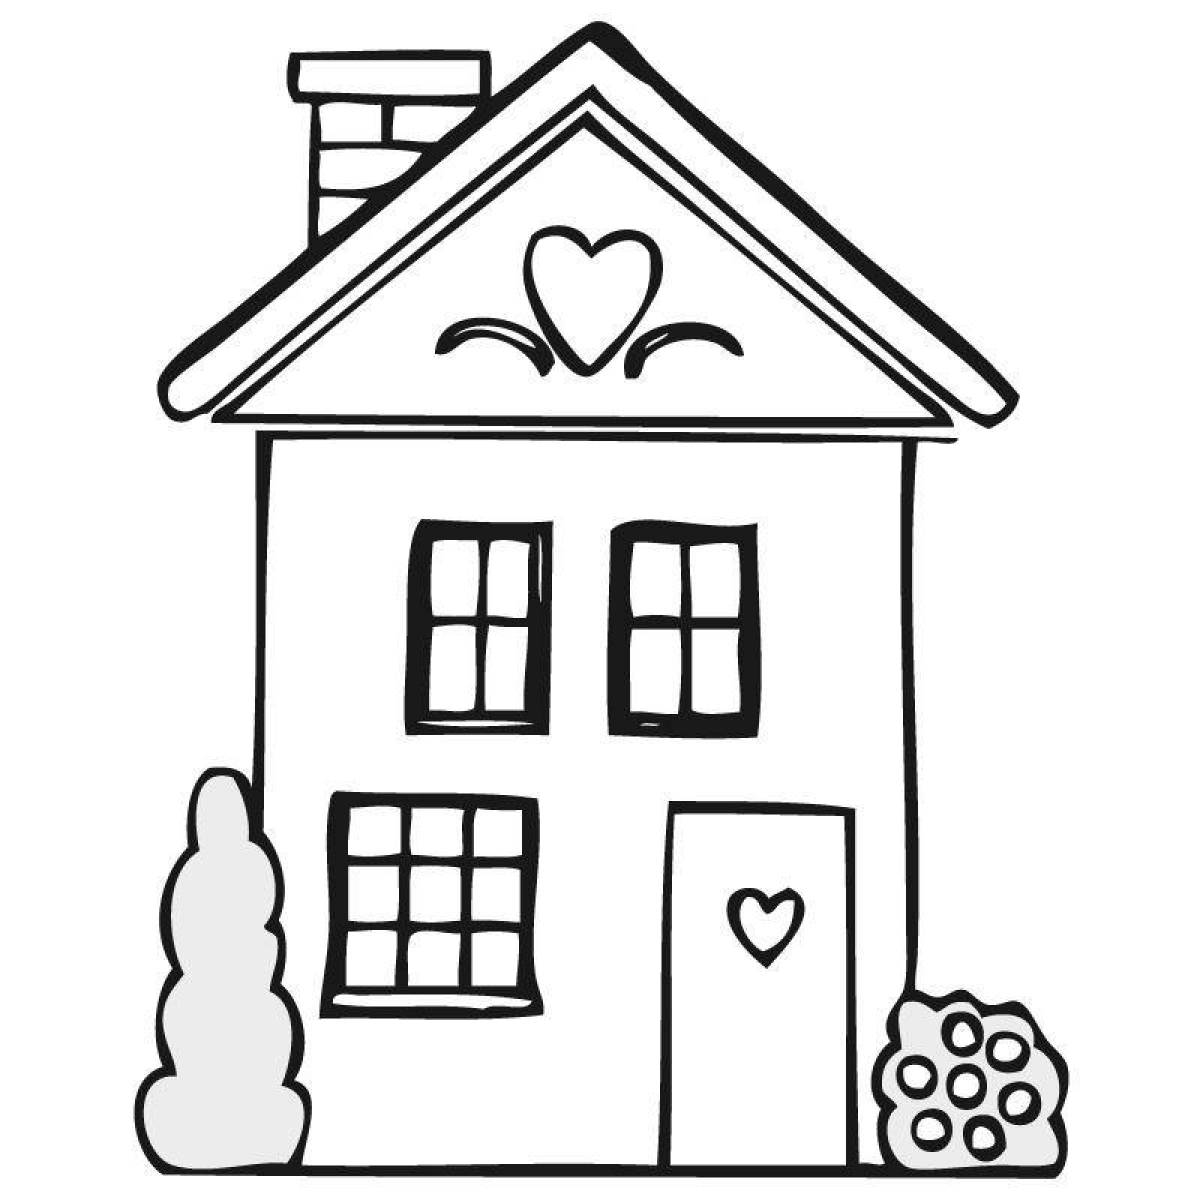 Adorable house coloring book for kids